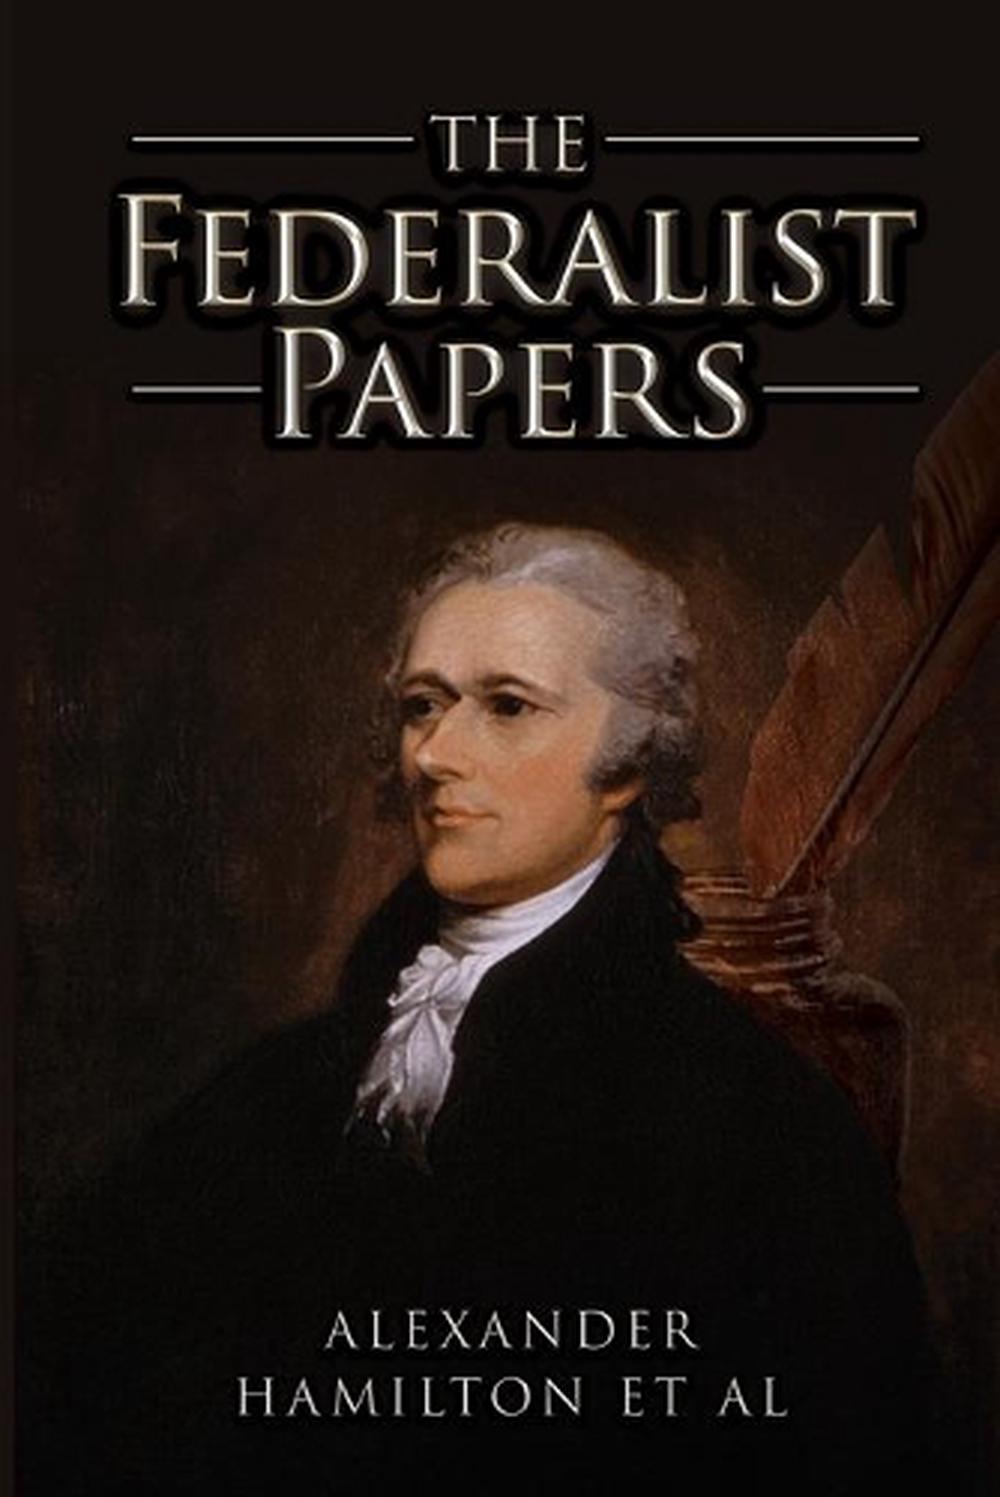 how many essays did hamilton wrote for the federalist papers